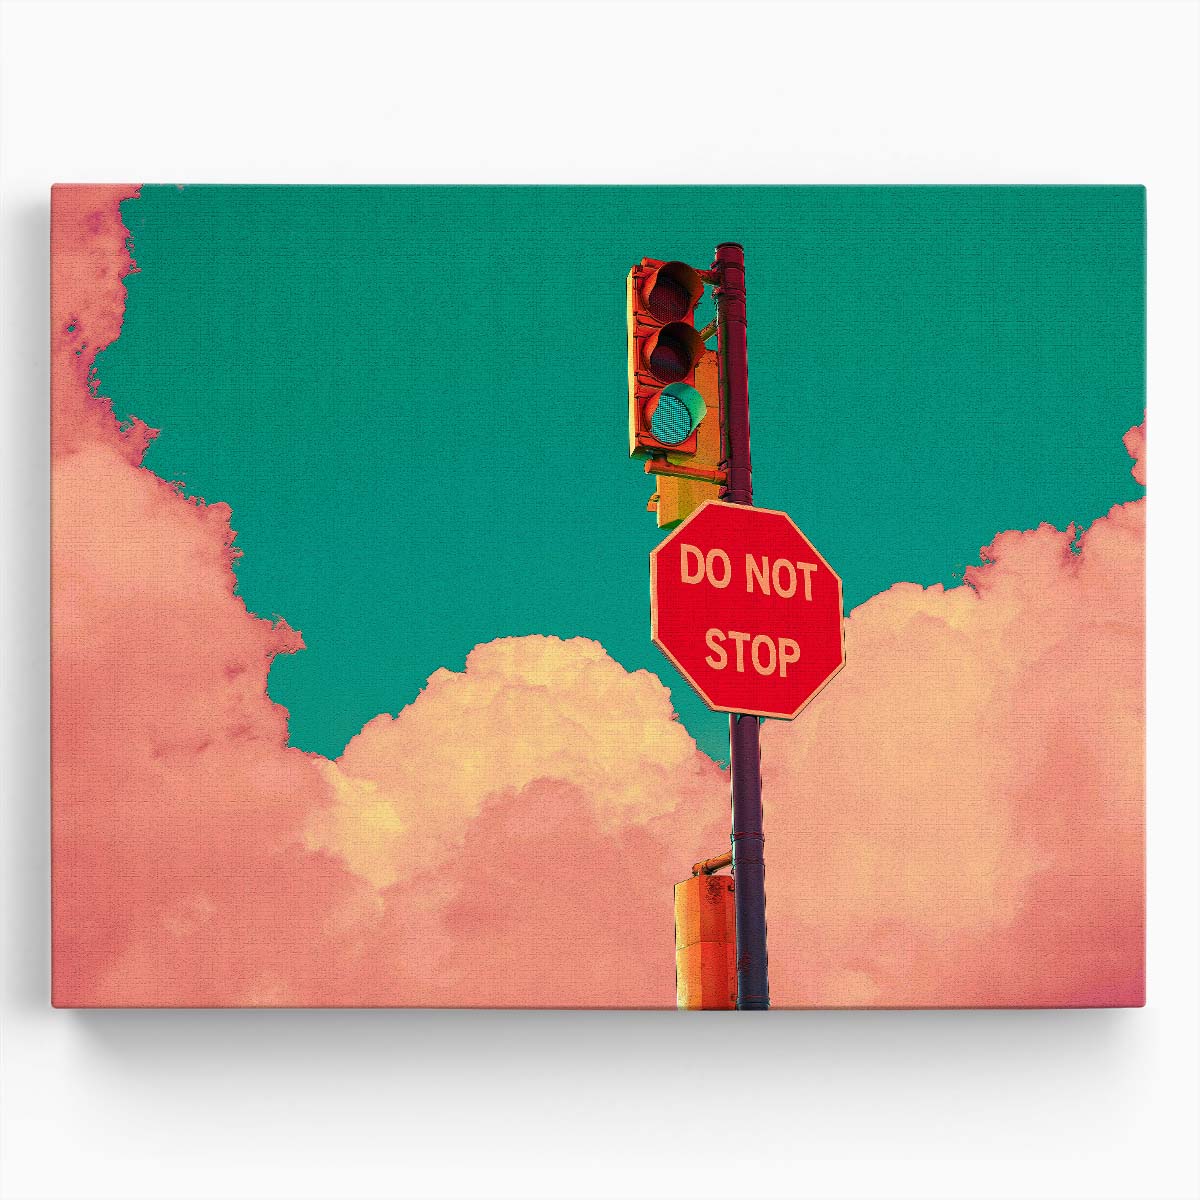 Surreal Motivational StopGo Signpost Wall Art by Luxuriance Designs. Made in USA.